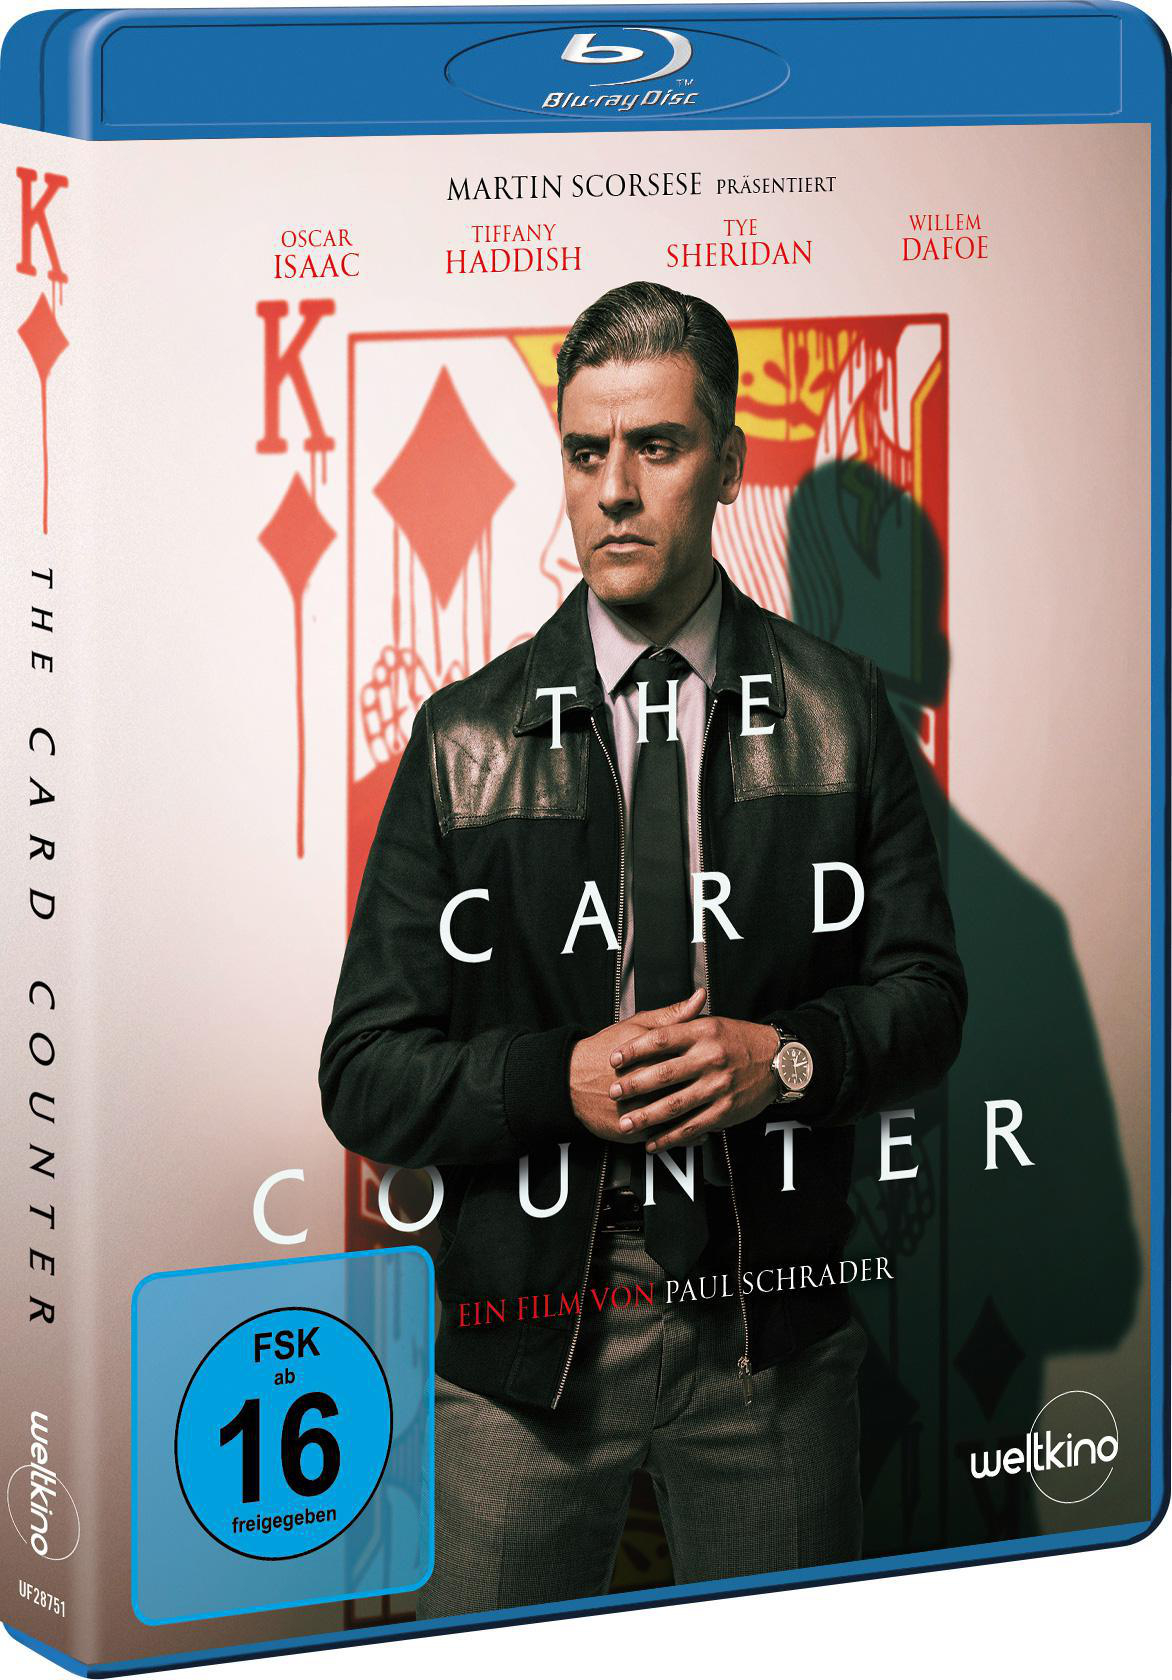 The Card Blu-ray Counter